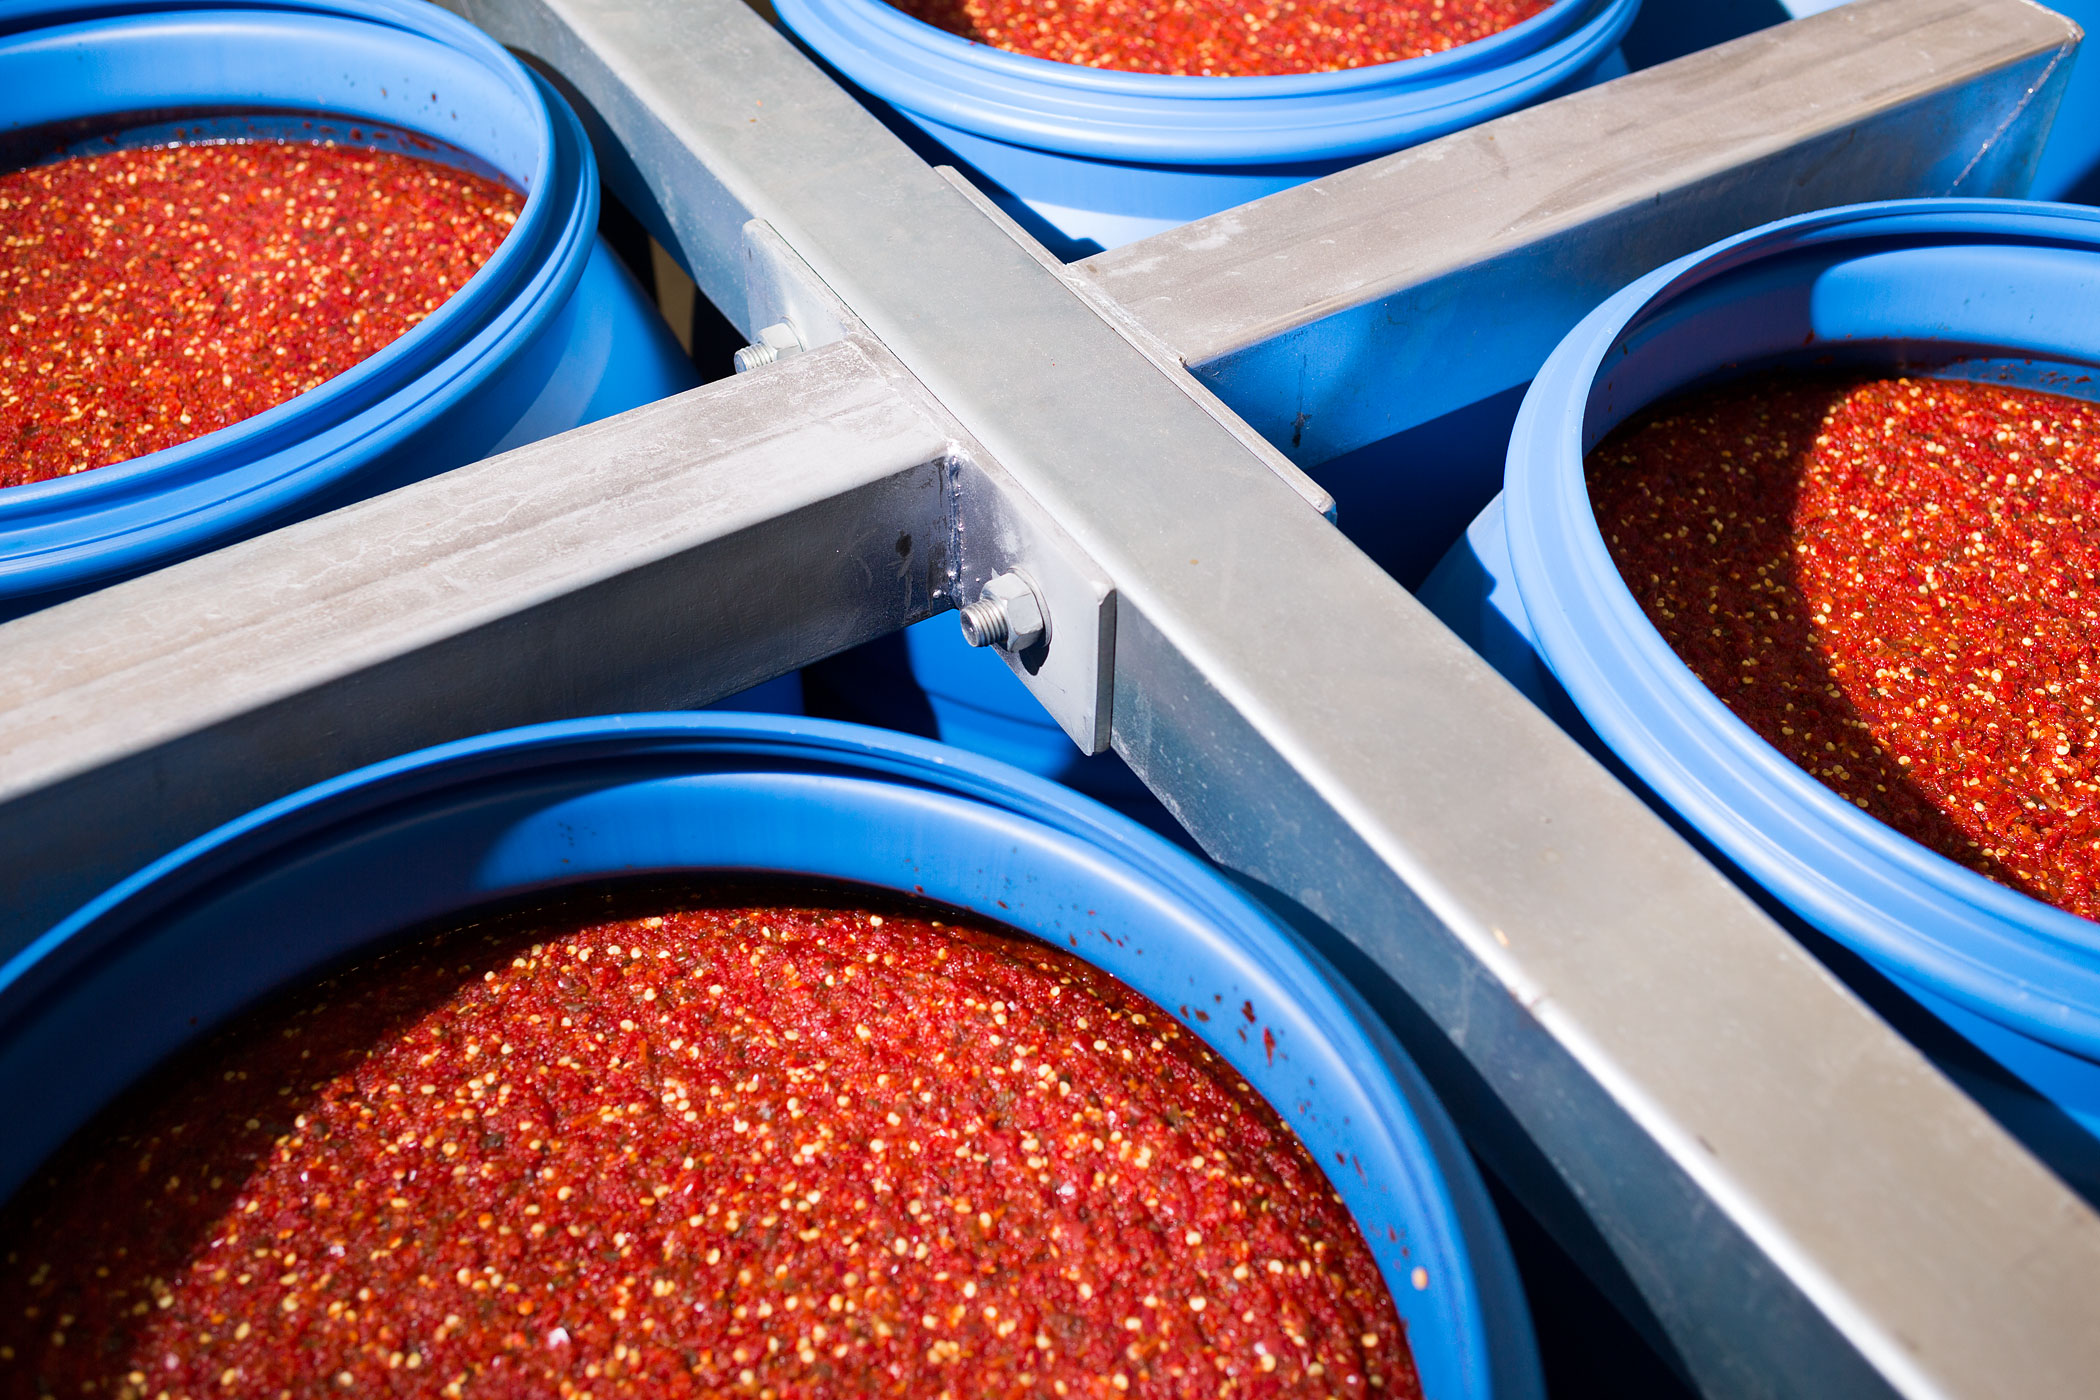 Crushed chilies are eventually mixed with sugar, salt, garlic and vinegar to make Sriracha.